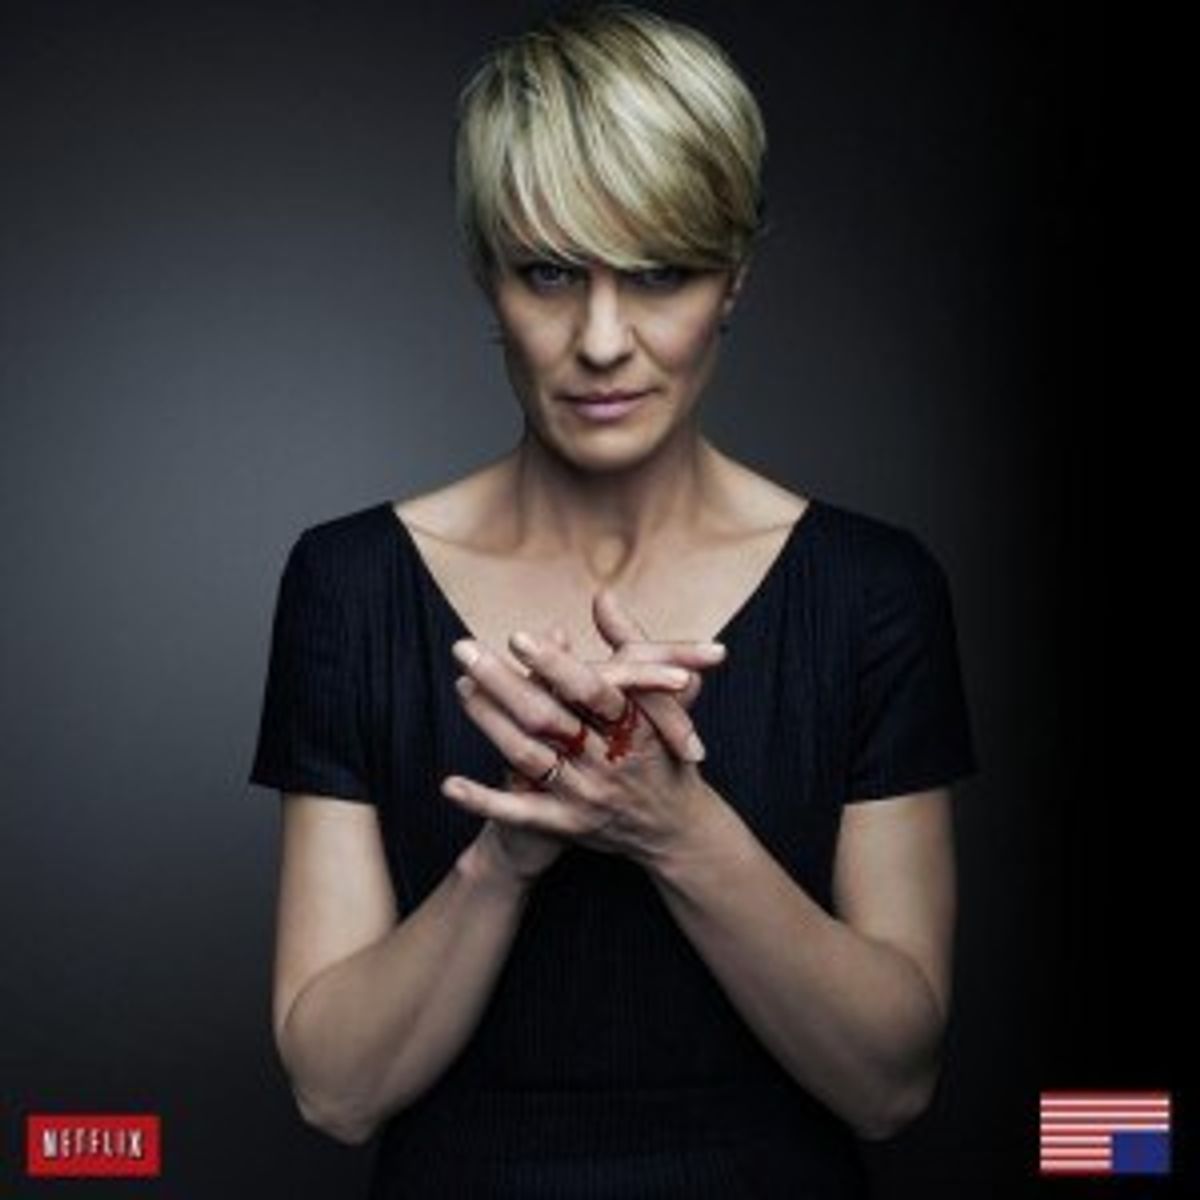 11 Reasons Why Claire Underwood is the Best Character on 'House of Cards'